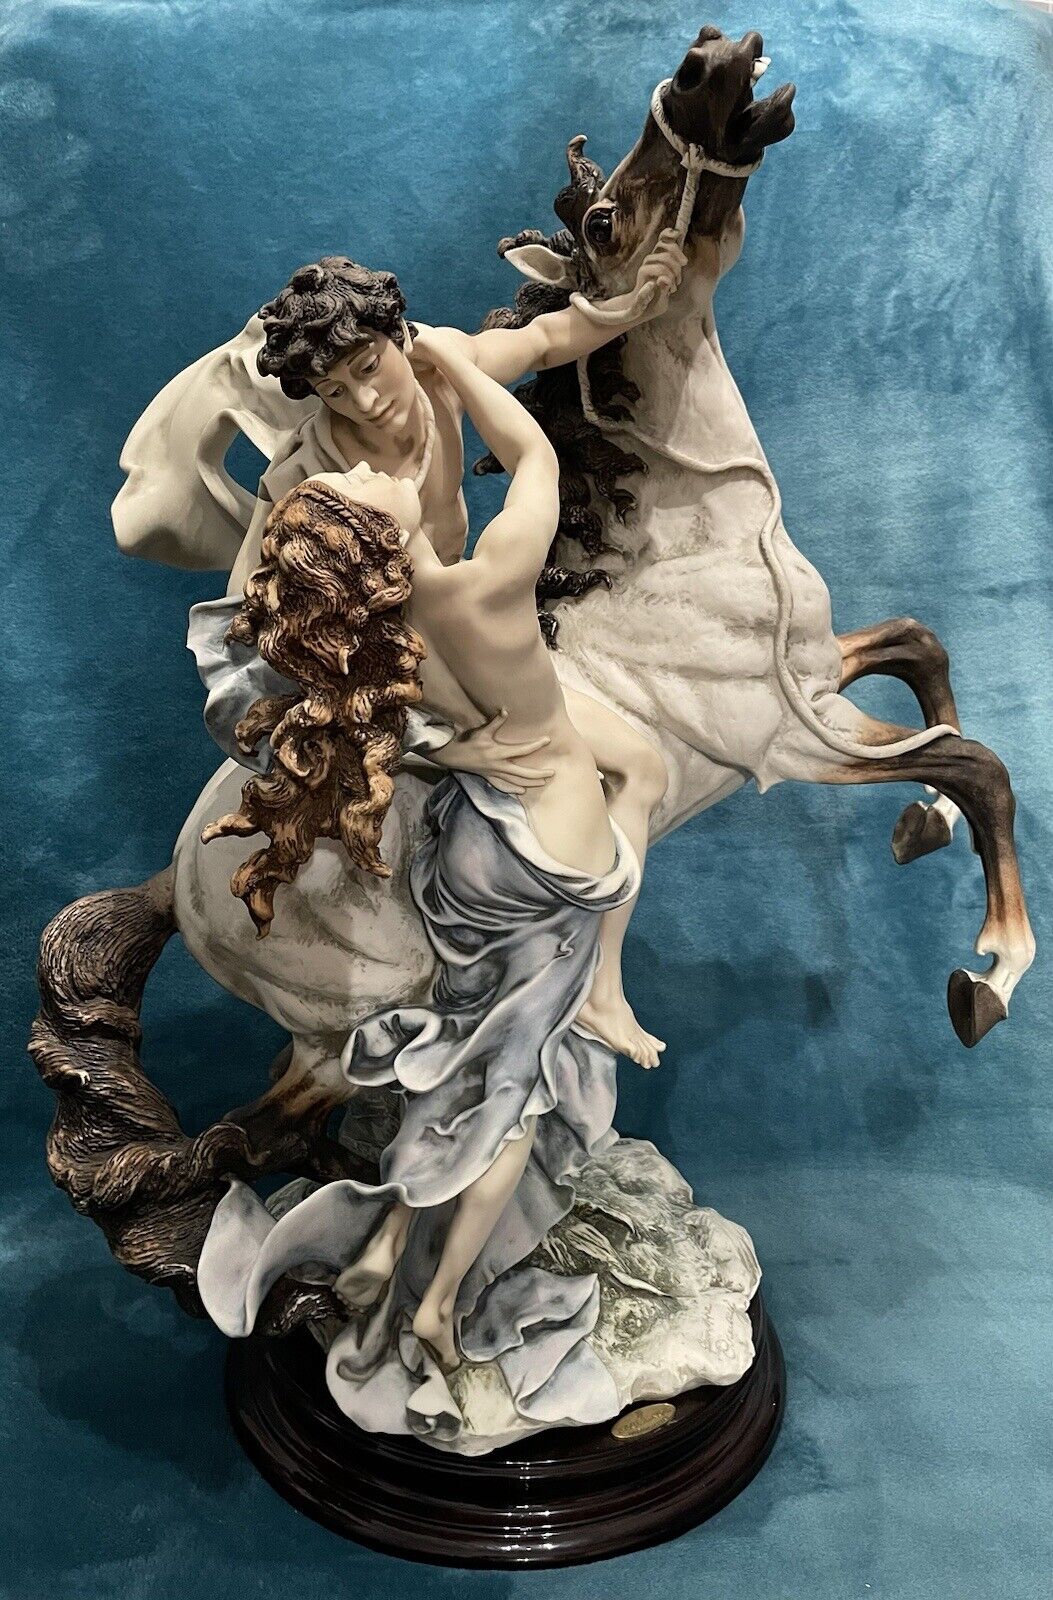 giuseppe armani figurines collectibles florence “The embrace”